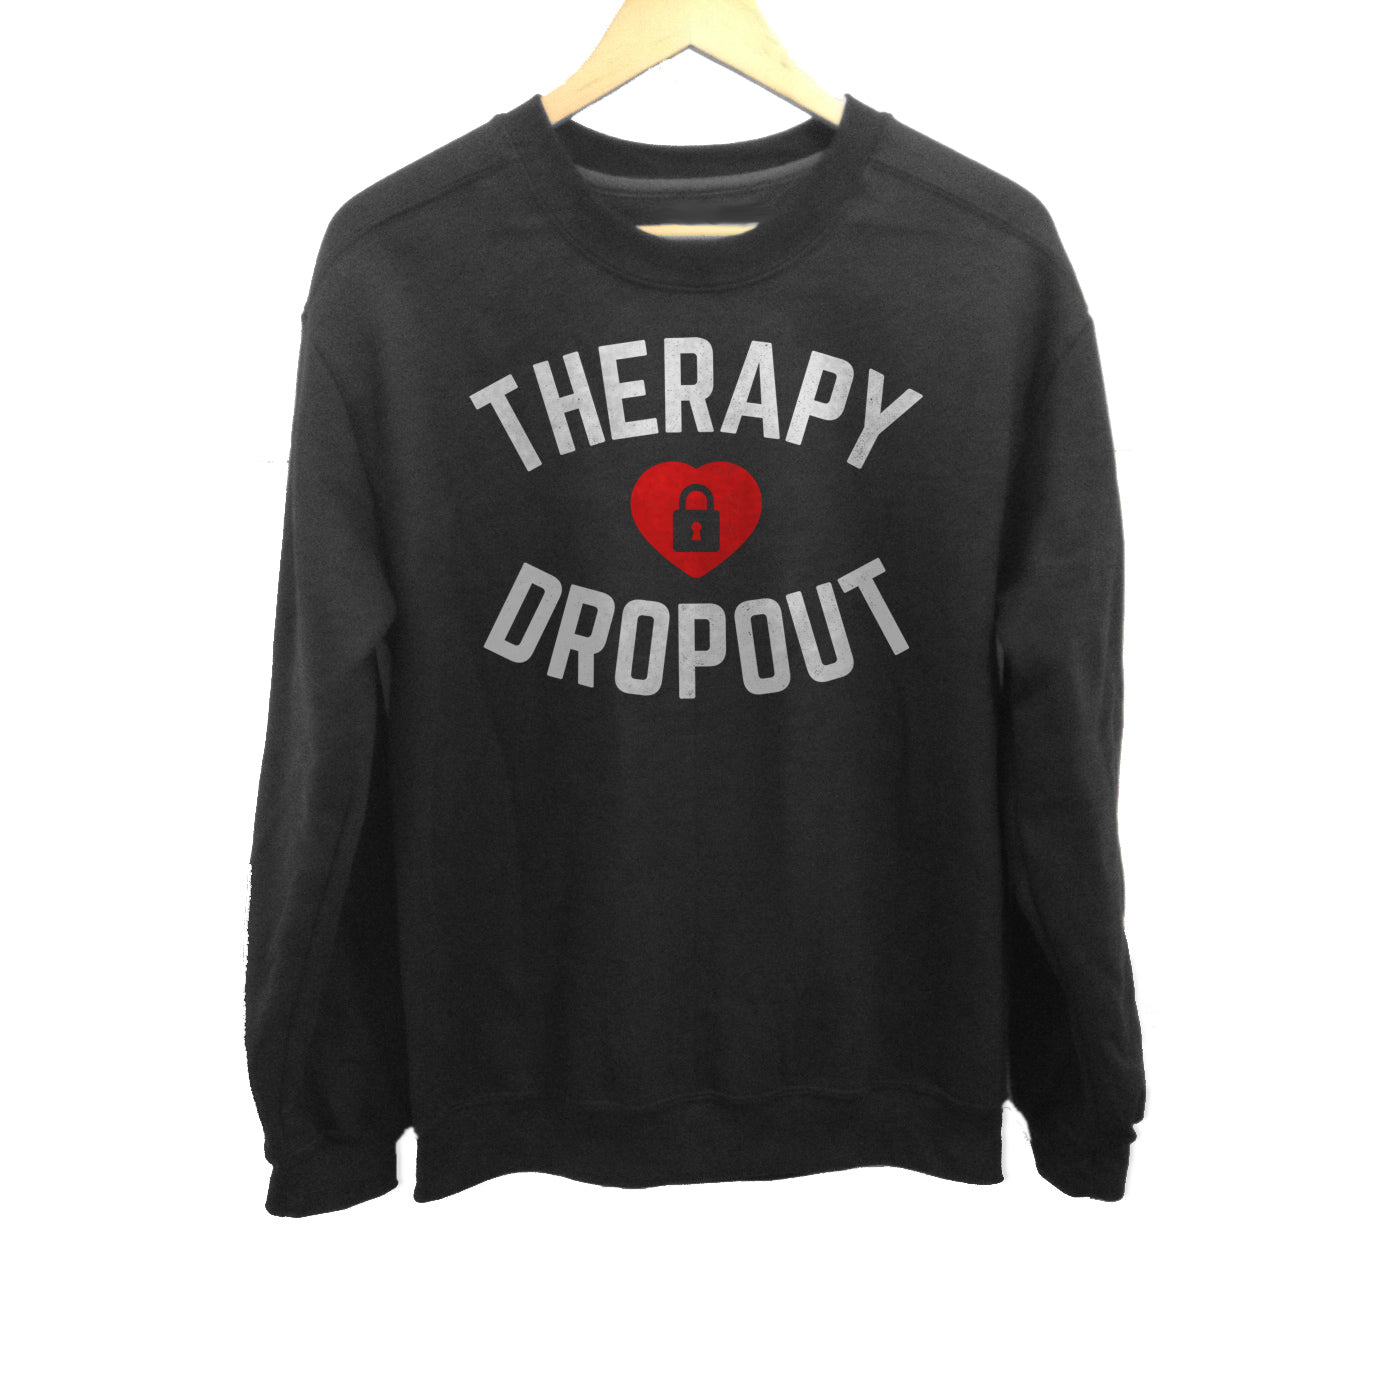 Unisex Therapy Dropout Sweatshirt